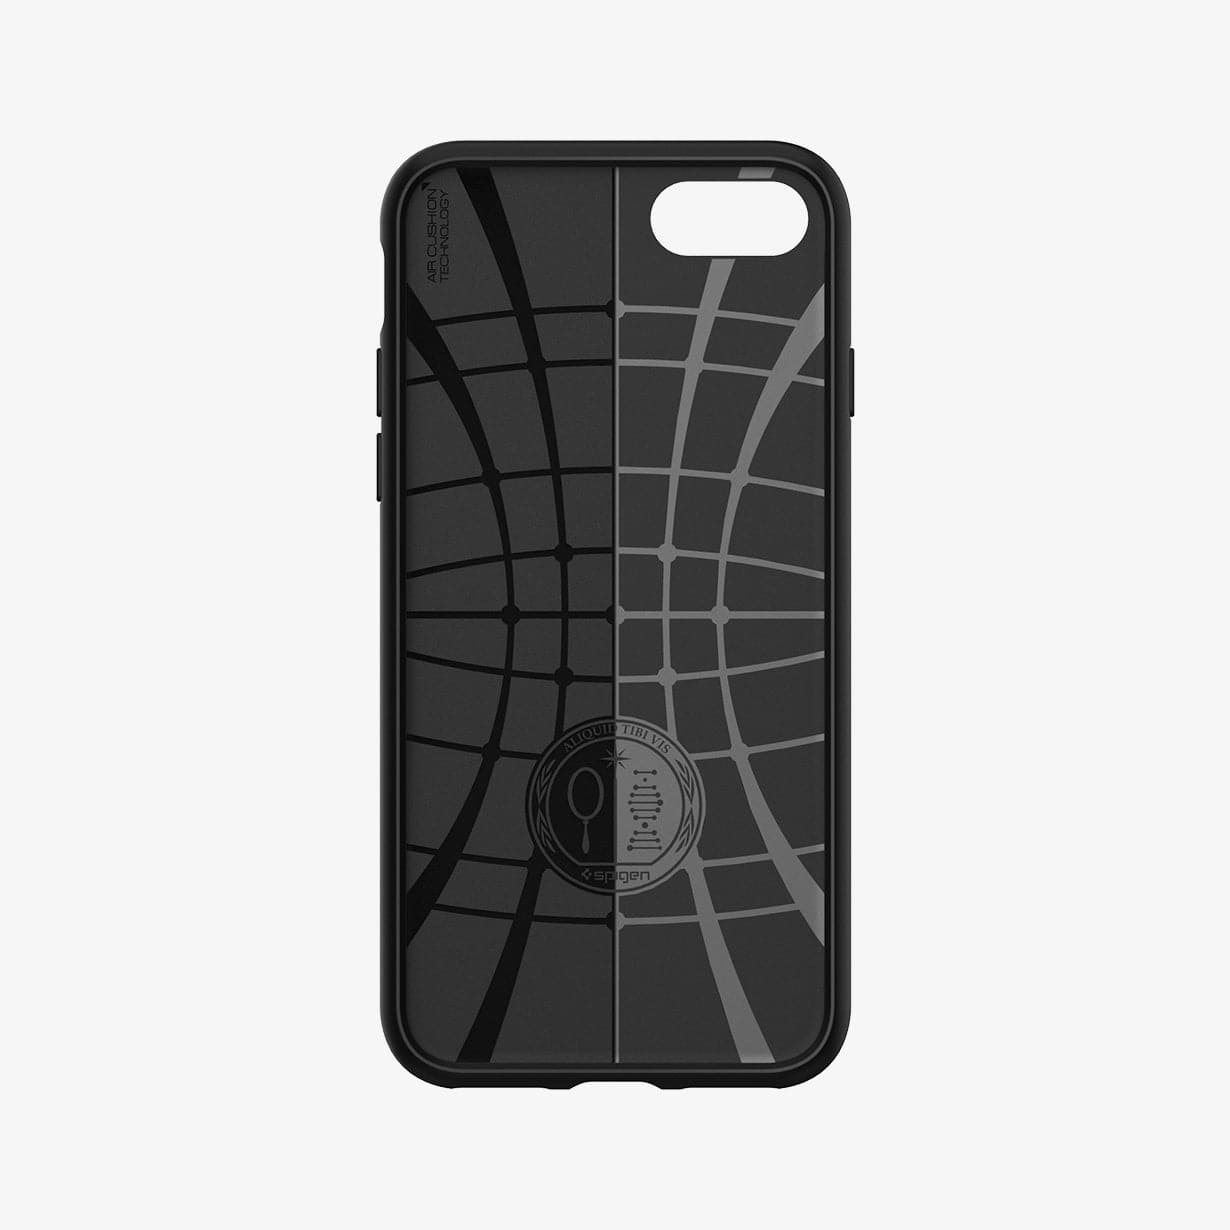 042CS20511 - iPhone 8 Series Liquid Air Case in Black showing the inner case with dual colors in spider web pattern